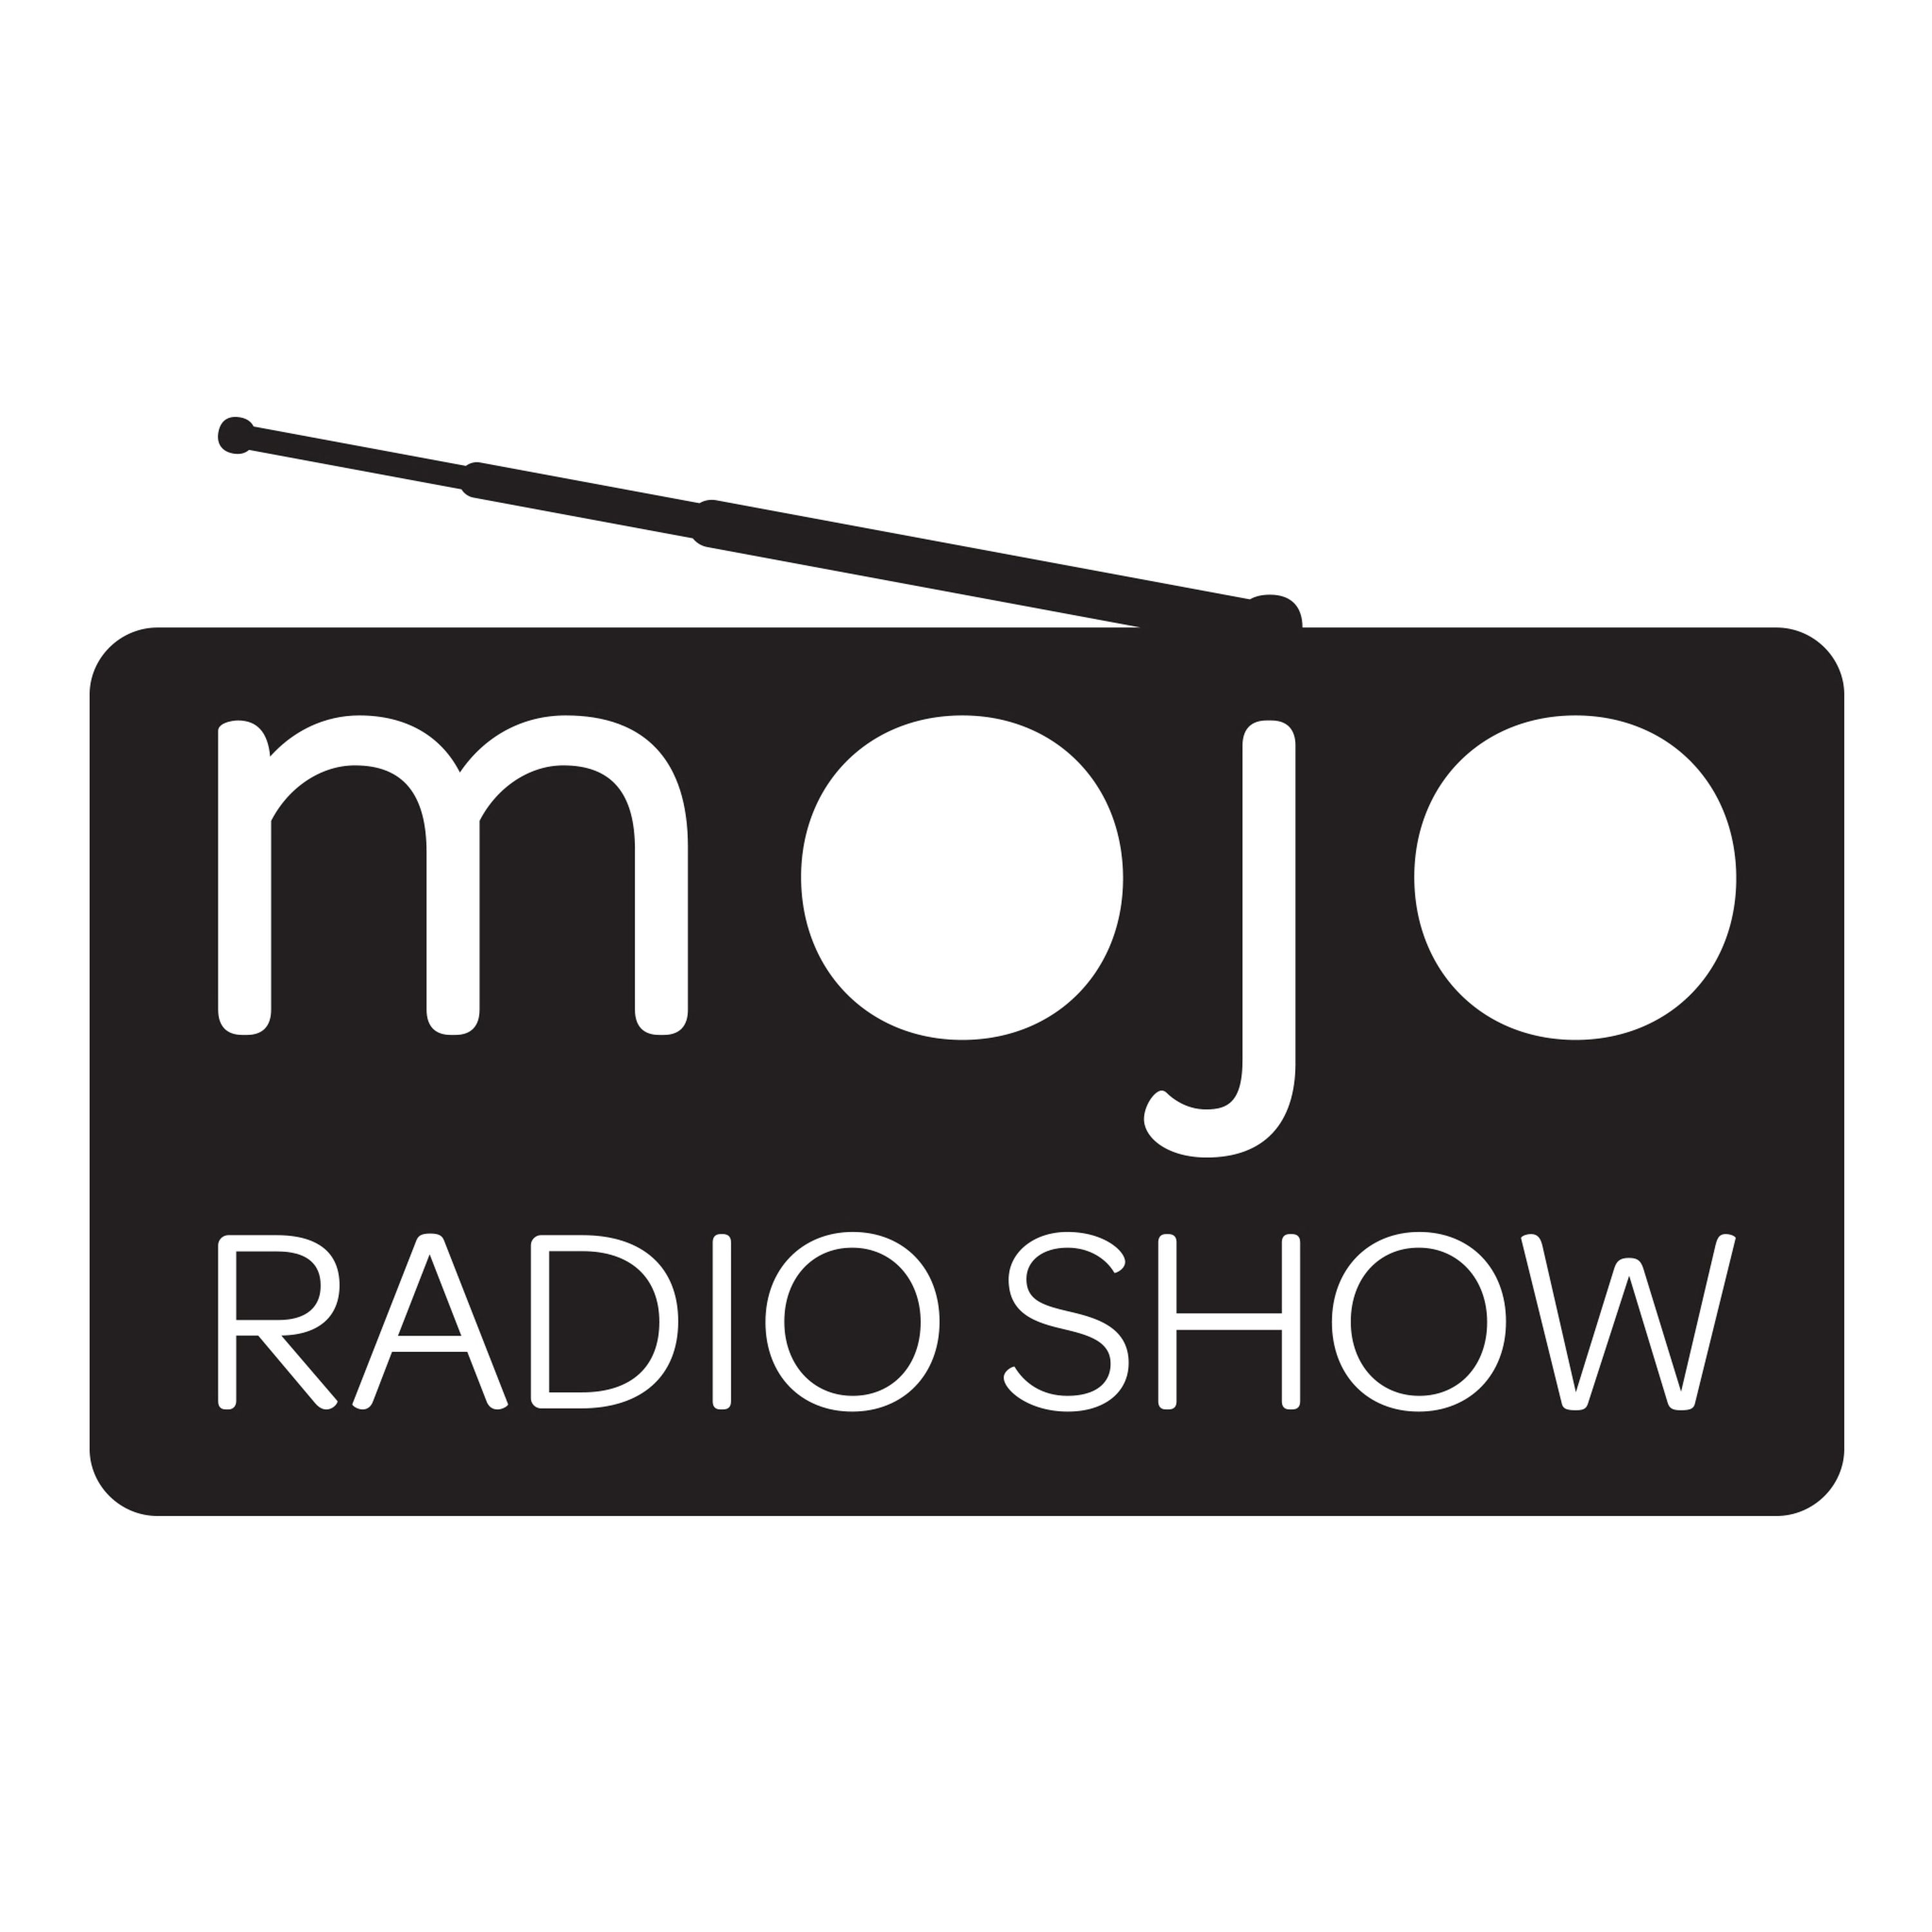 The Mojo Radio Show EP 140: Developing Mental Toughness in Business, Life and Sport - Dr Jason Selk